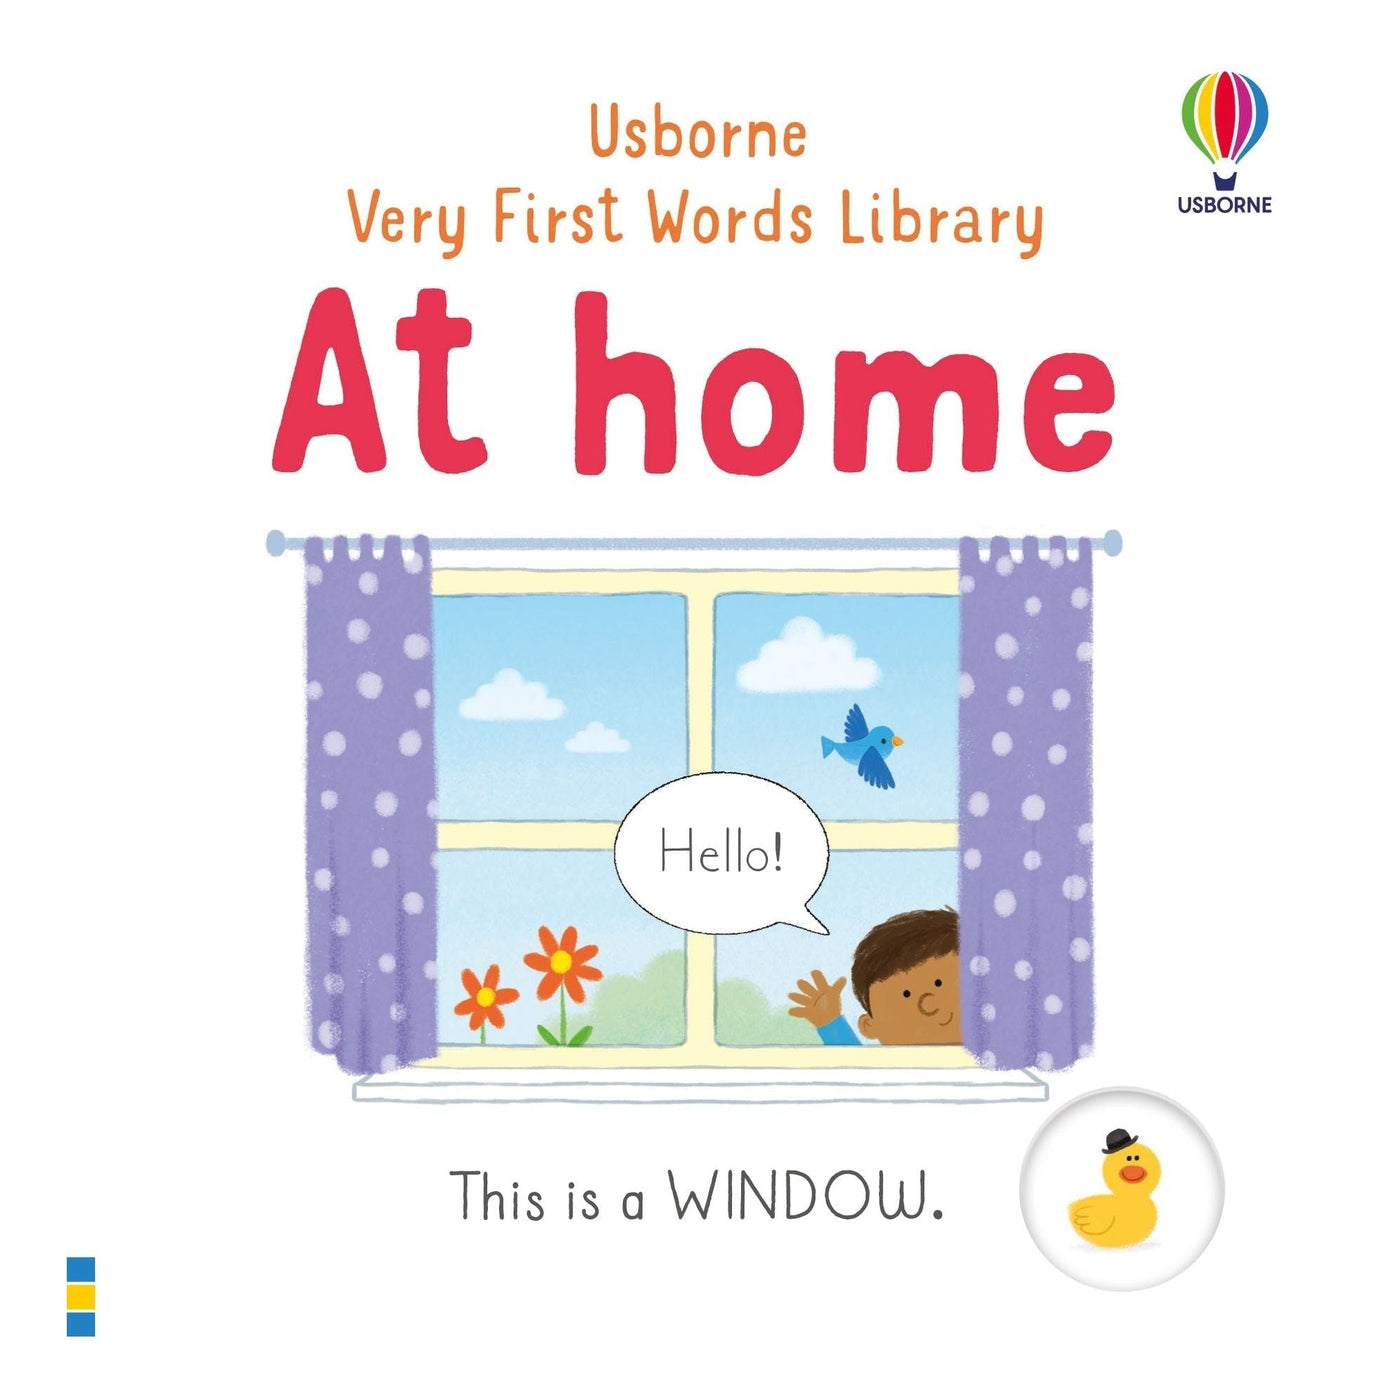 At Home (Very First Words Library) - Matthew Oldham & Tony Neal